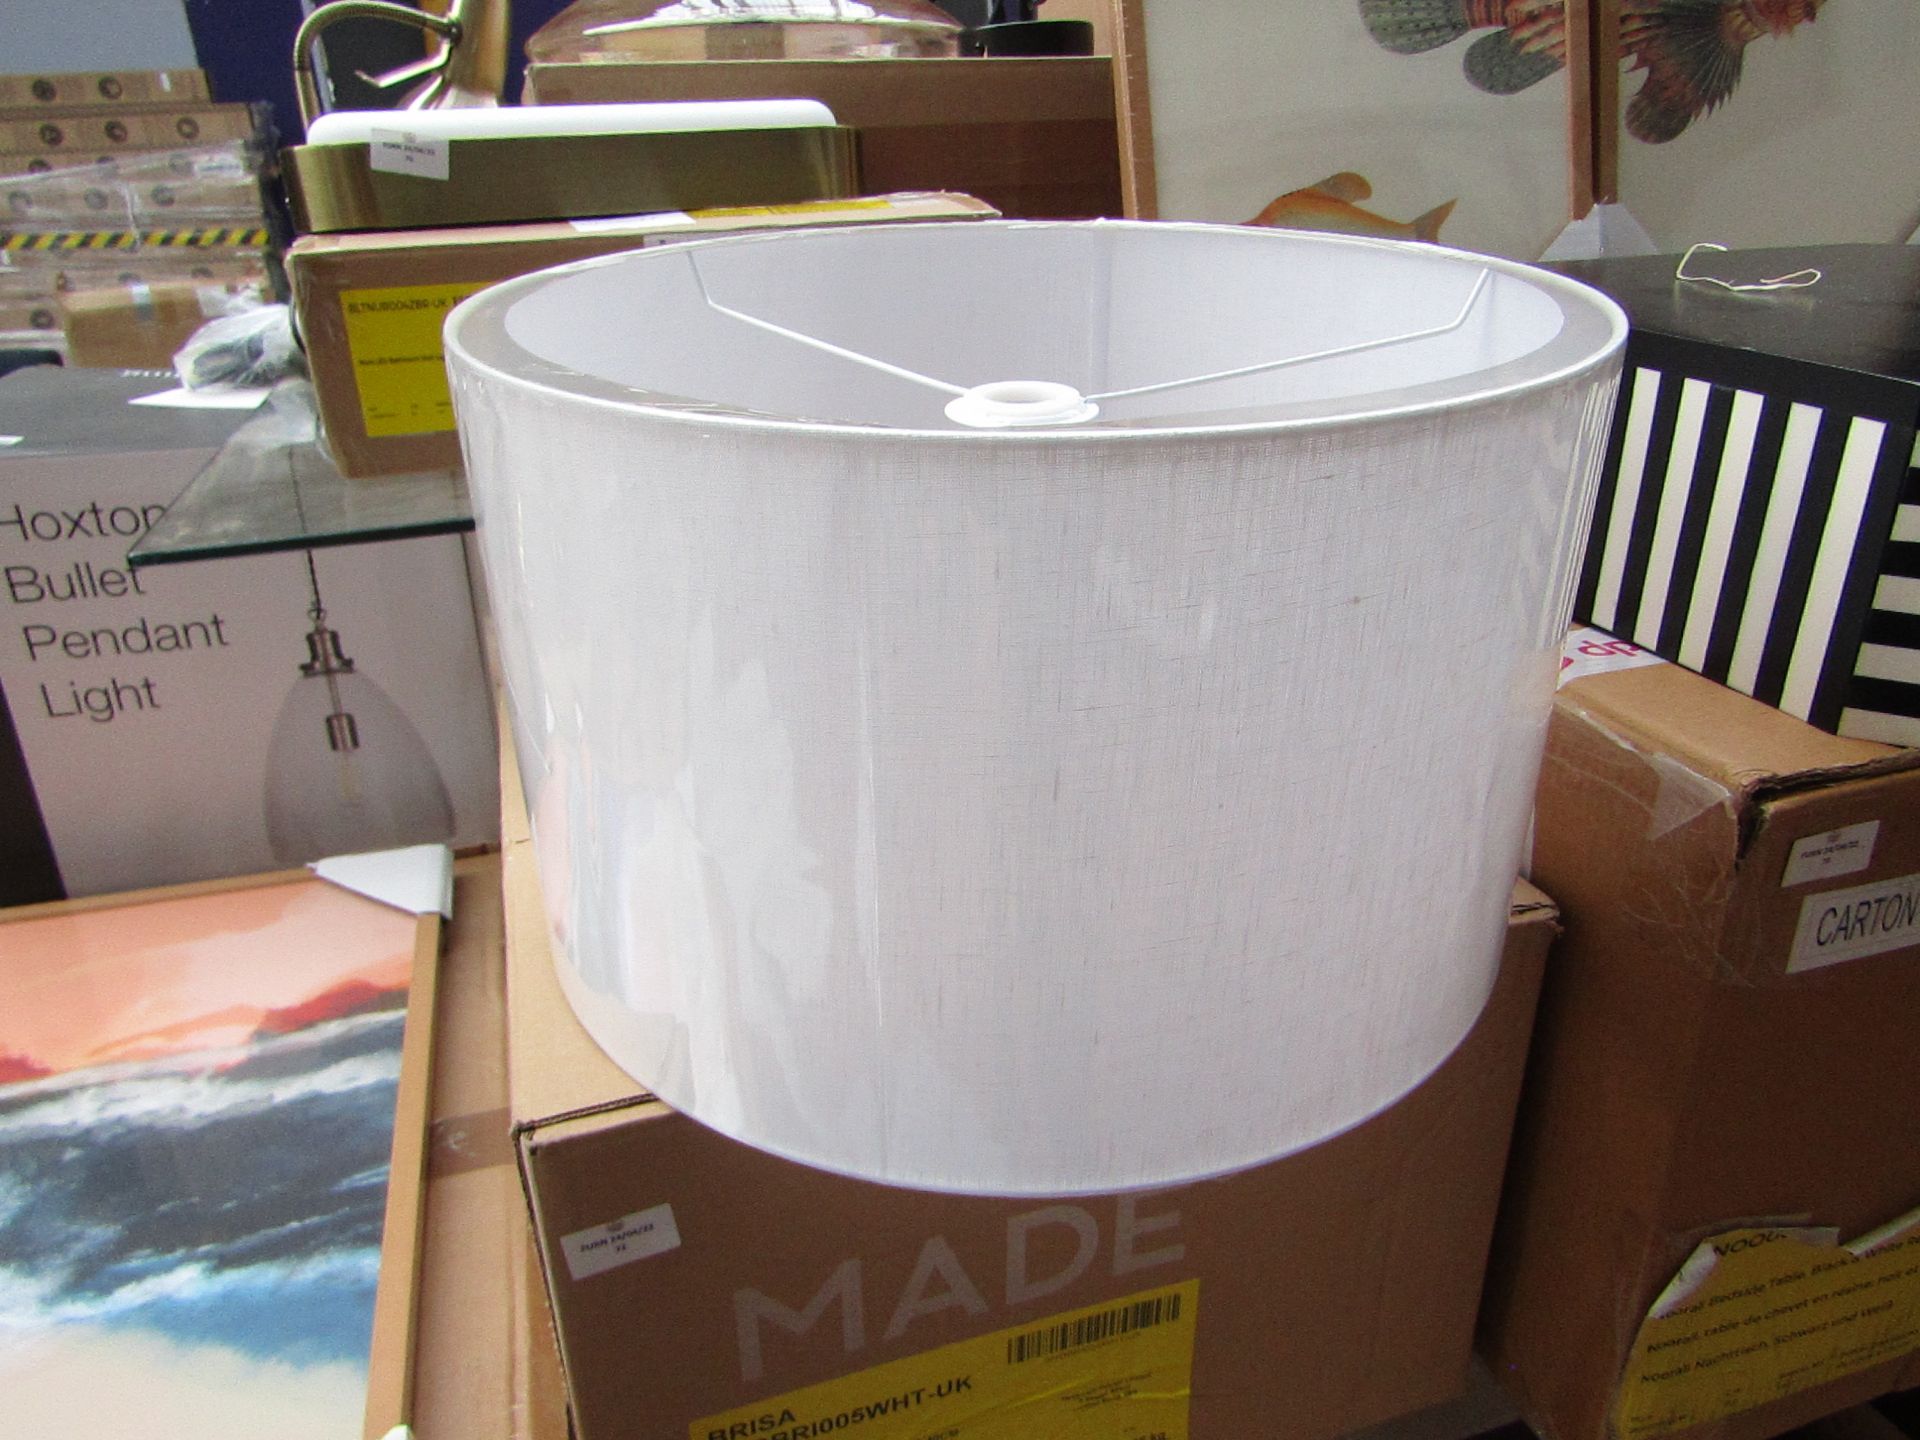 | 1X | MADE.COM BRISA 100% LINEN LAMPSHADE, 40CM WHITE | GOOD CONDITION & BOXED | RRP £45 |